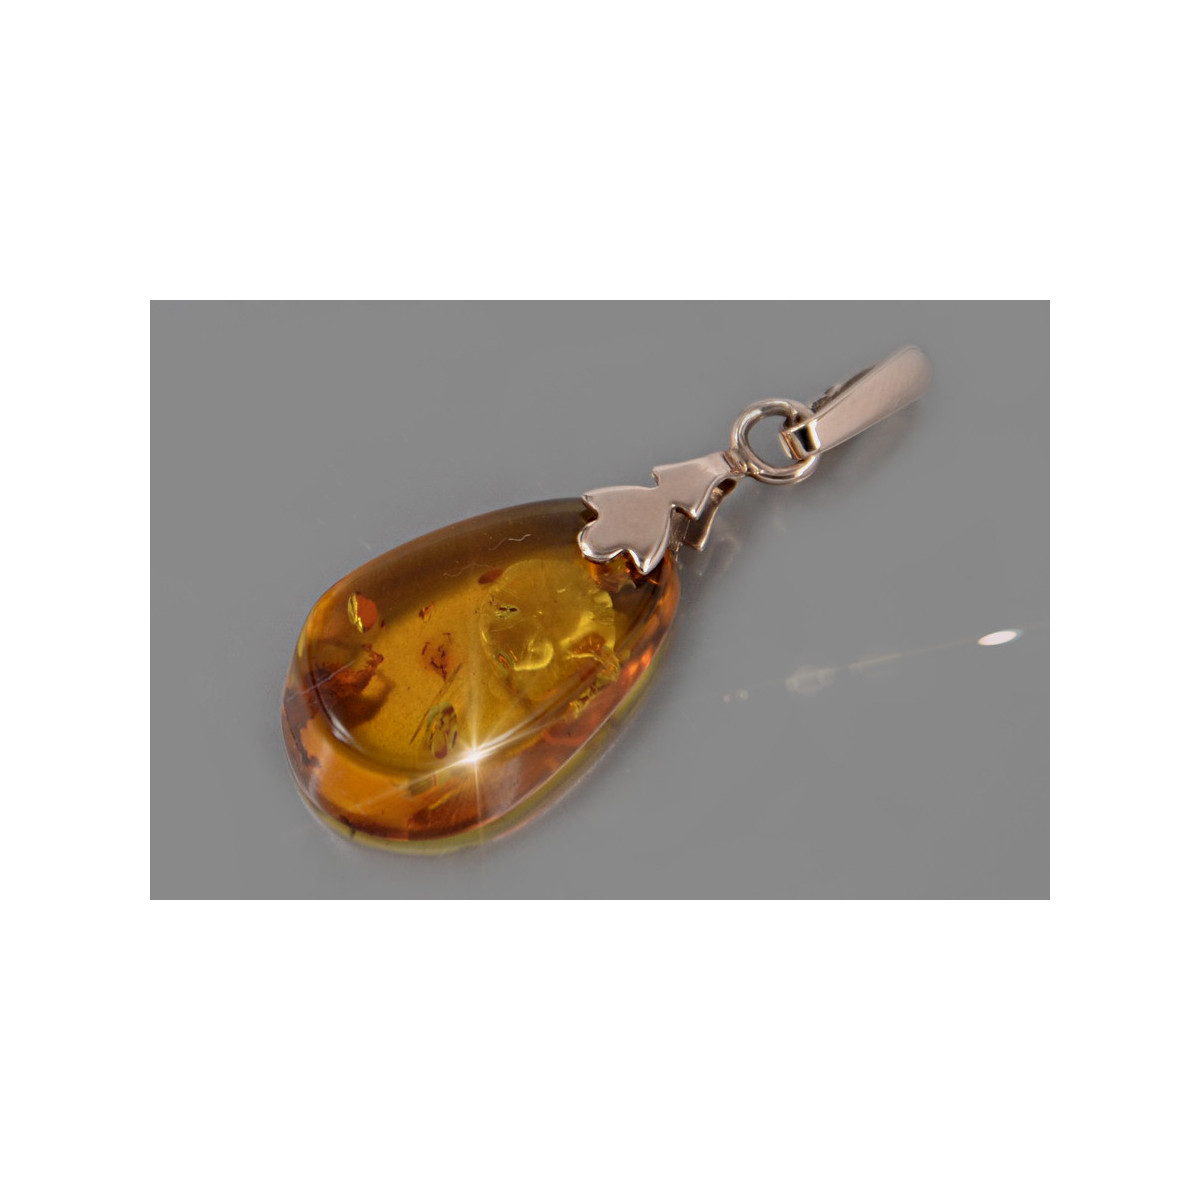 "Vintage-Inspired 14K 585 Rose Gold & Amber Jewelry Piece" vpab015